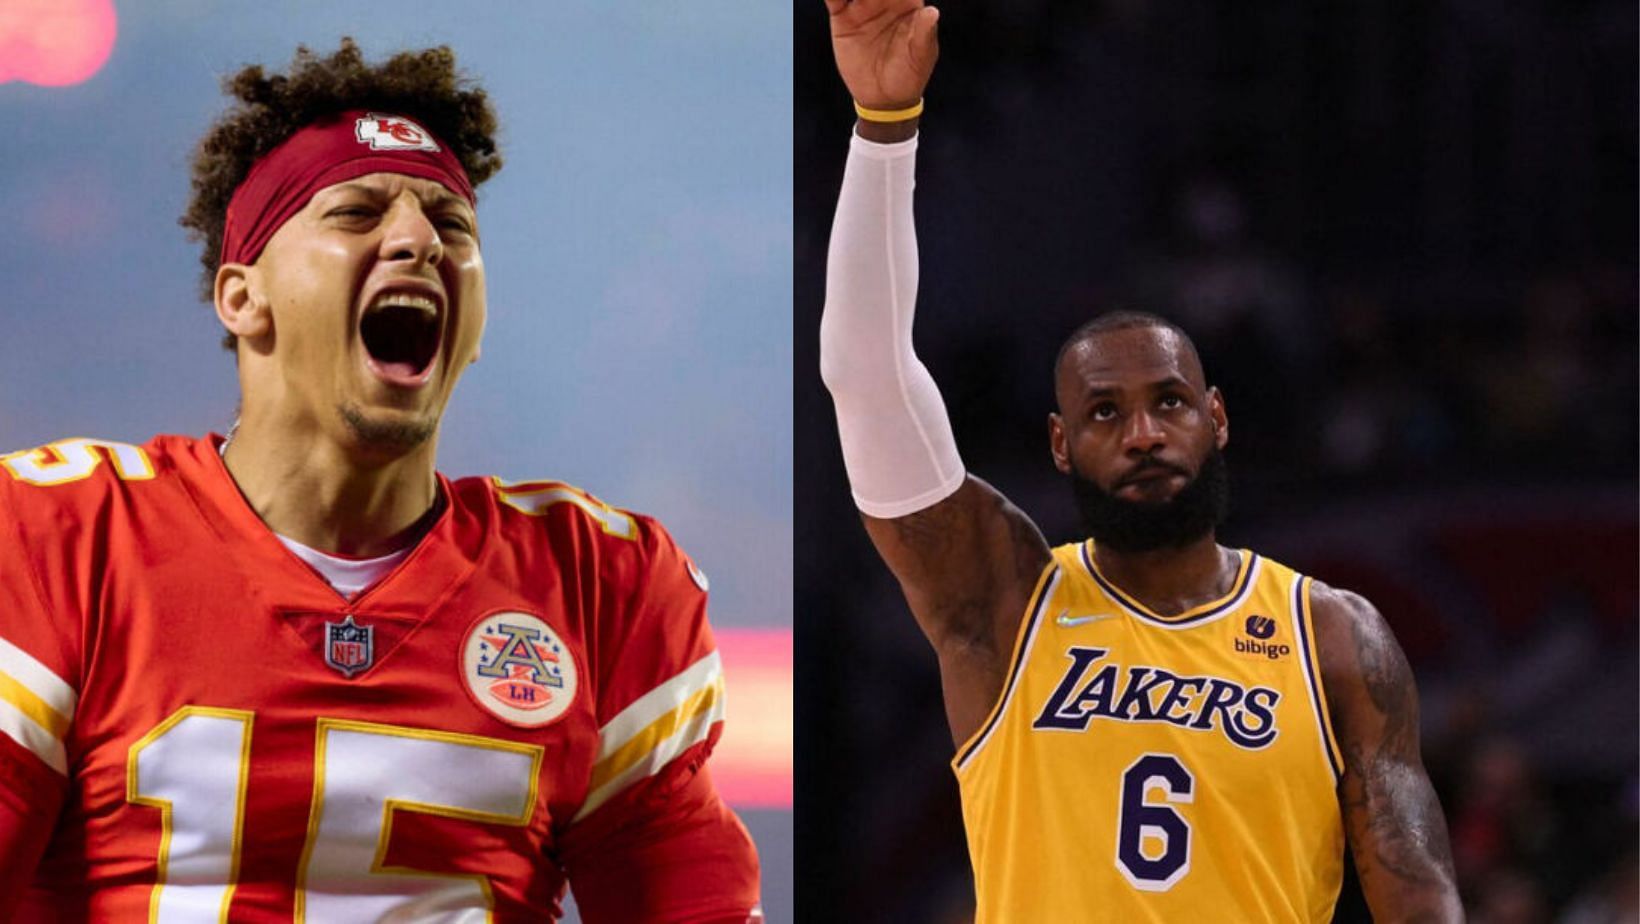 LeBron and Mahomes shared a moment during the Lakers game